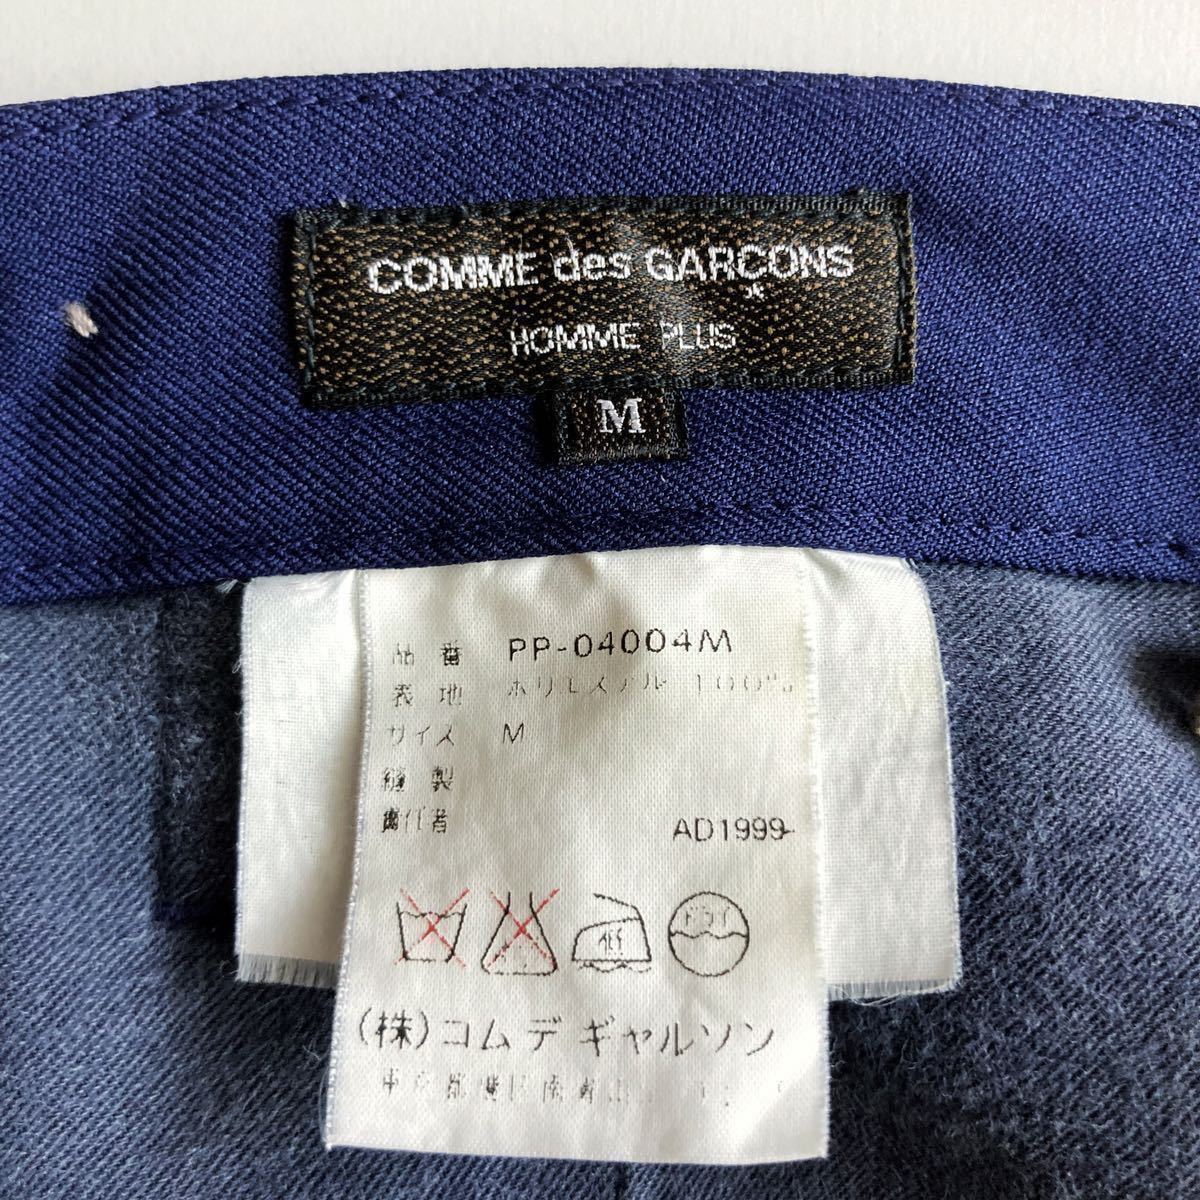 AD1999 COMME des GARCONS HOMME PLUS スーべニールキッチュ期